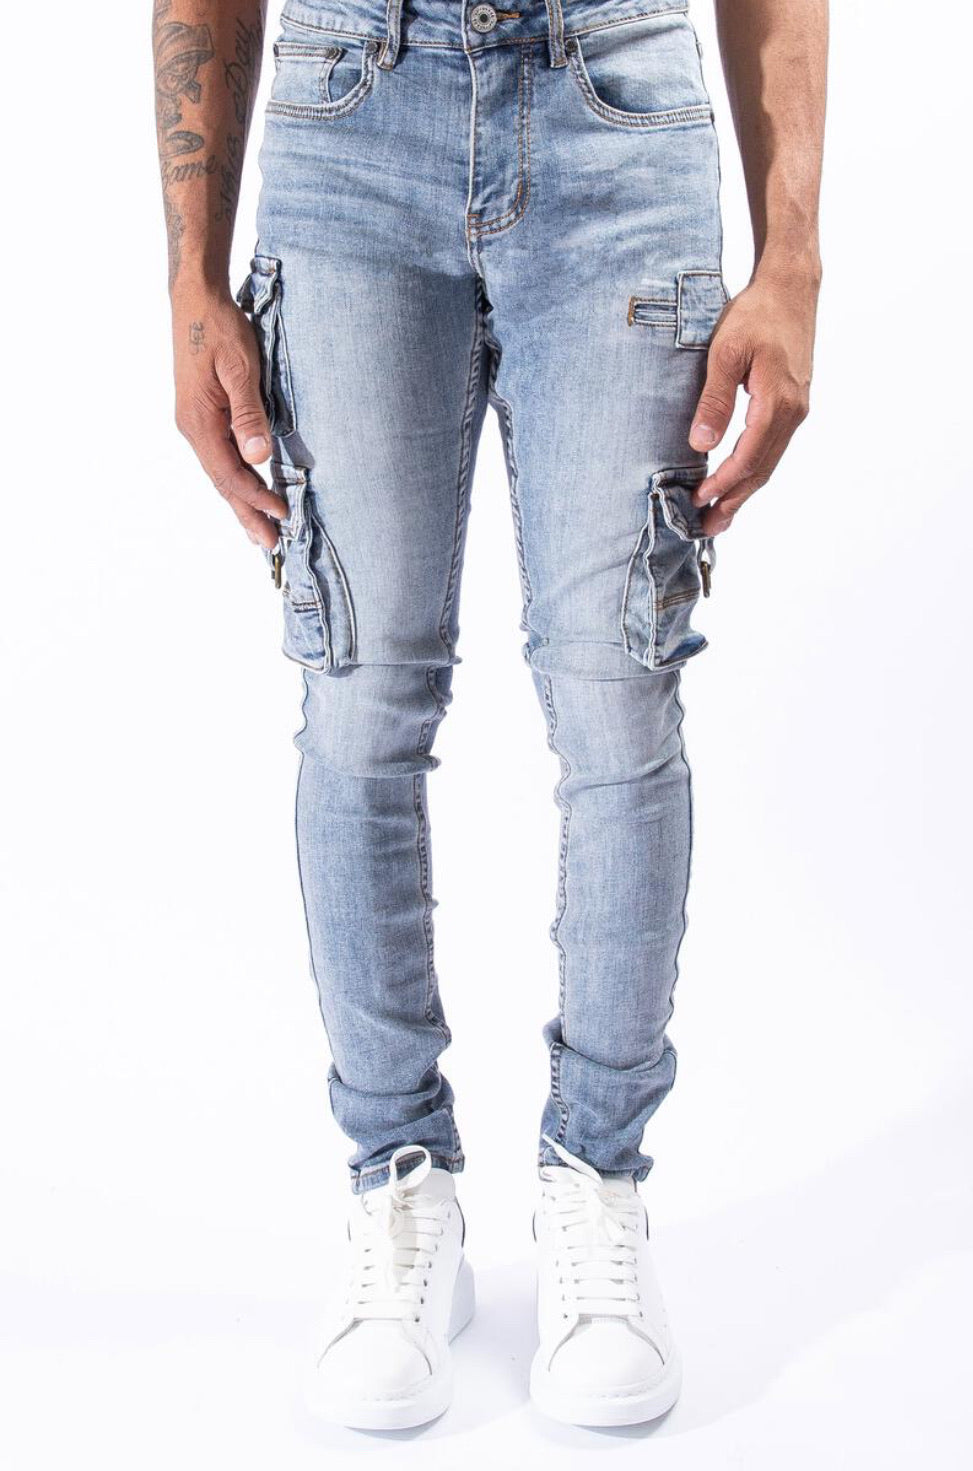 Serenede-New Earth Cargo Jeans-Blue